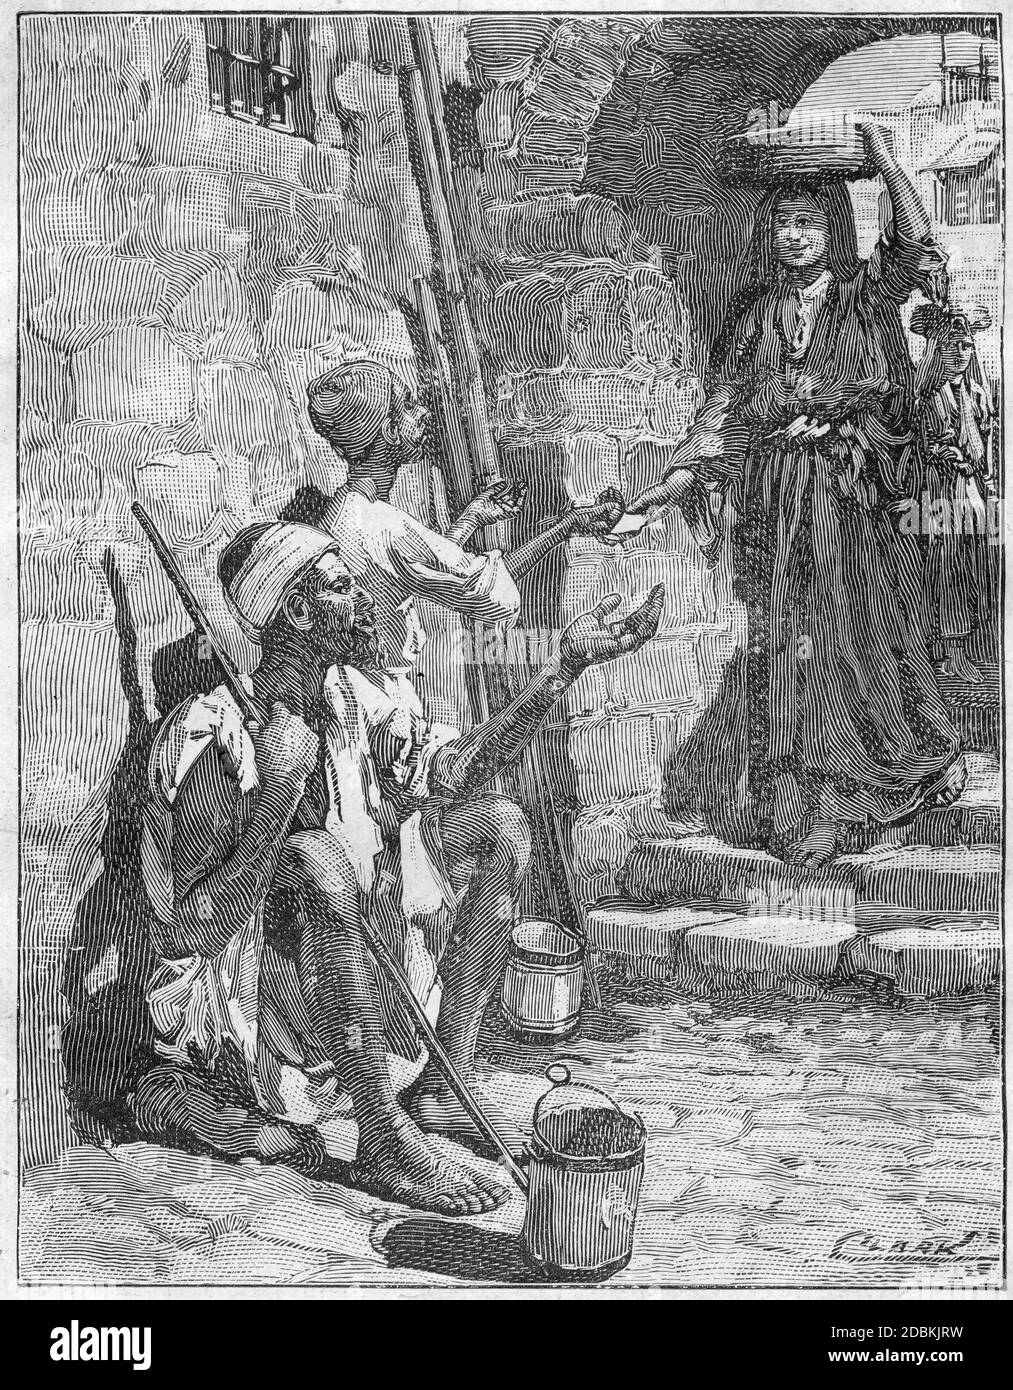 Engraving of a beggars seeking money in the streets of an ancient city Stock Photo